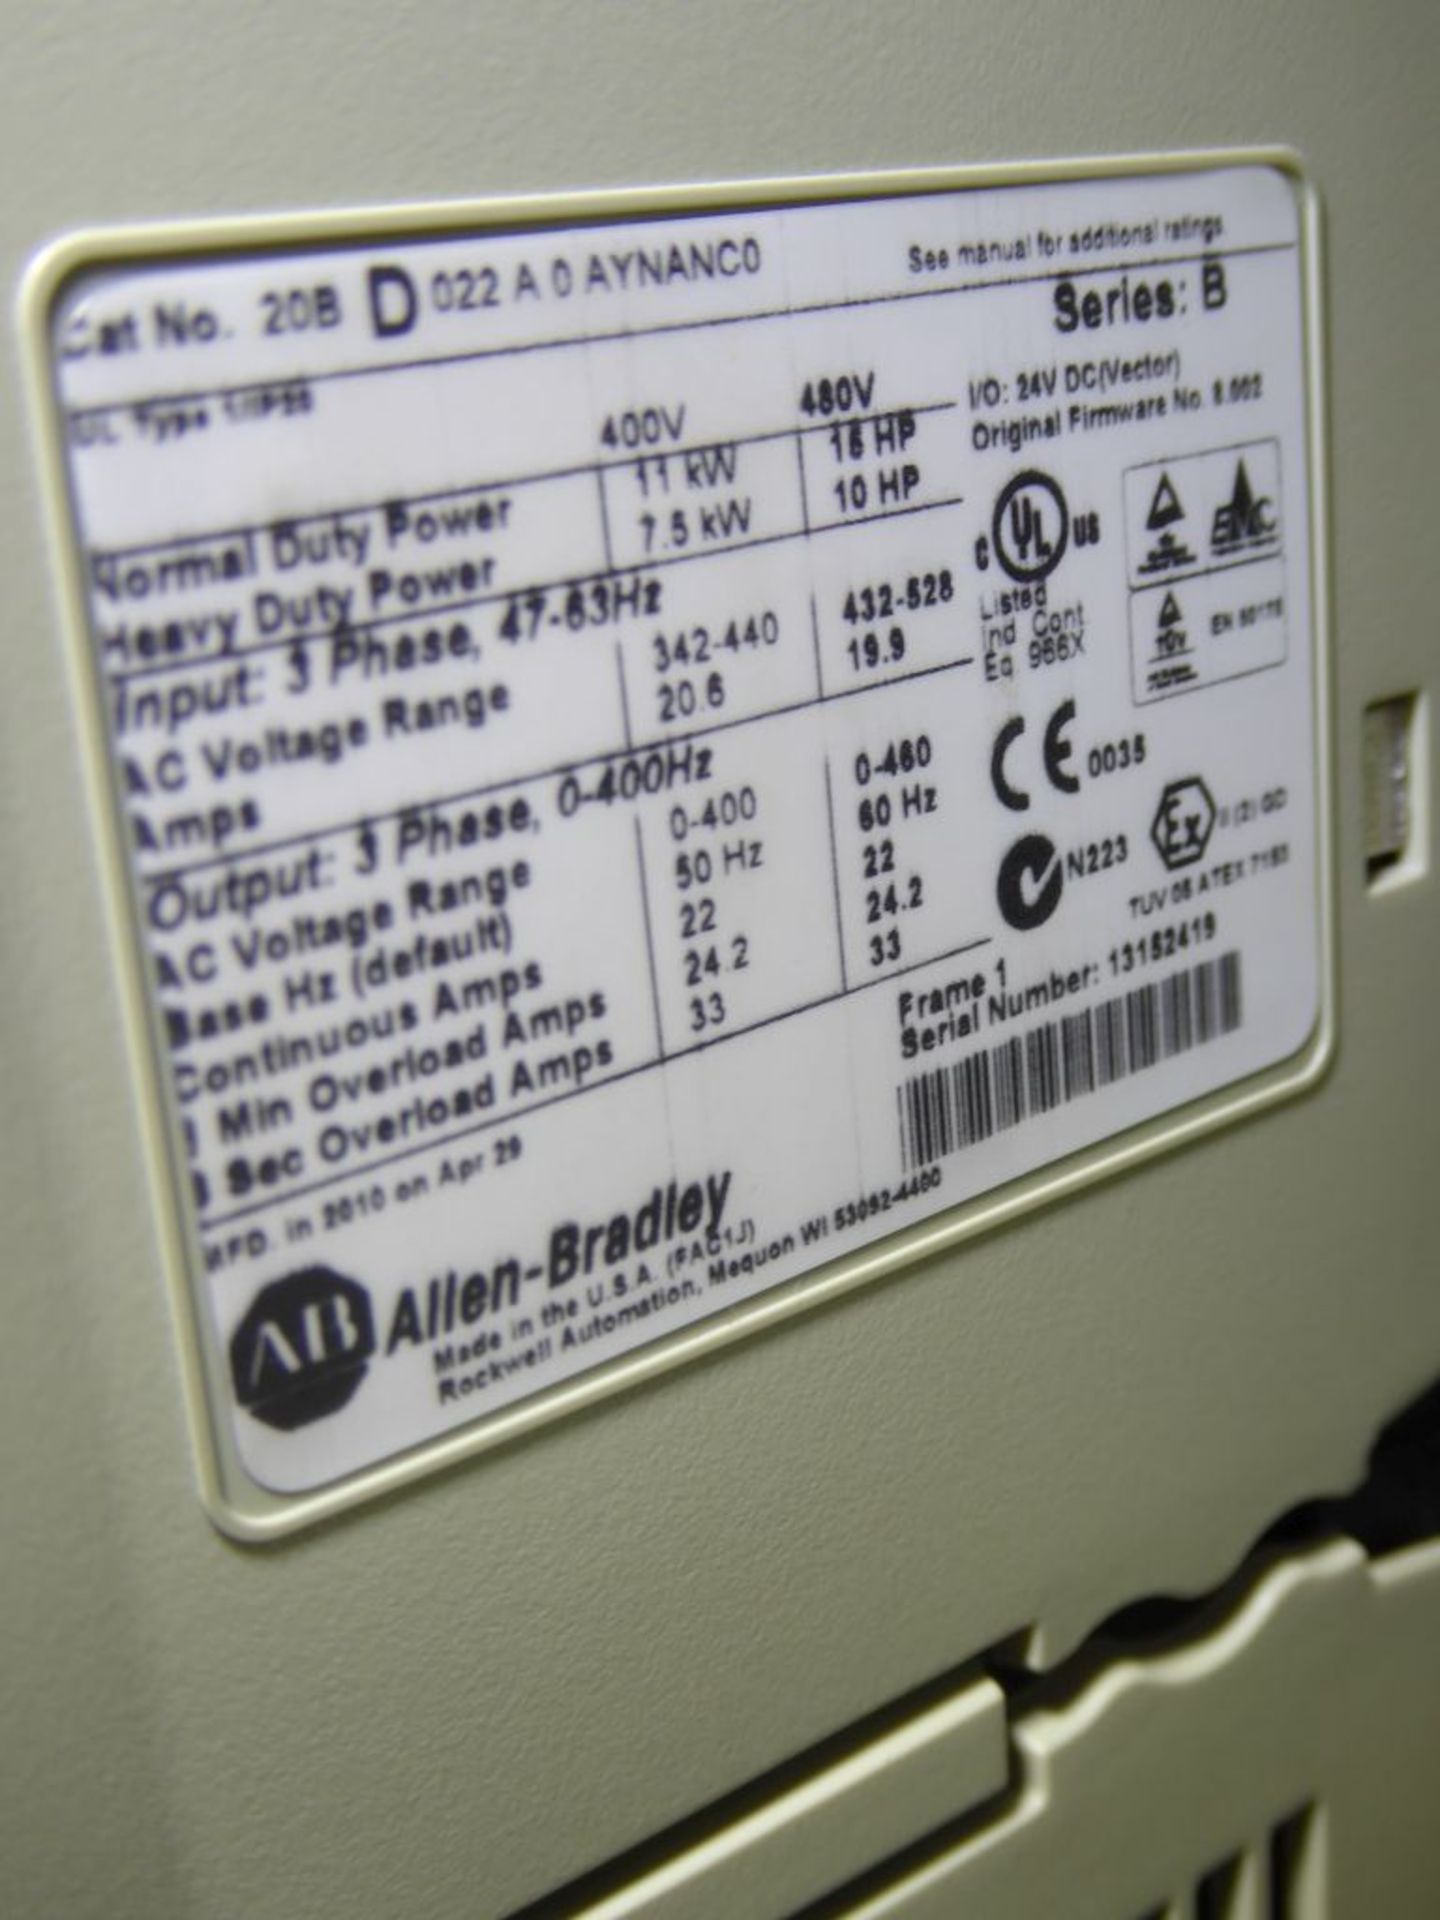 Control Panel with (2) Allen Bradley Powerflex 700 Drives - Image 11 of 12